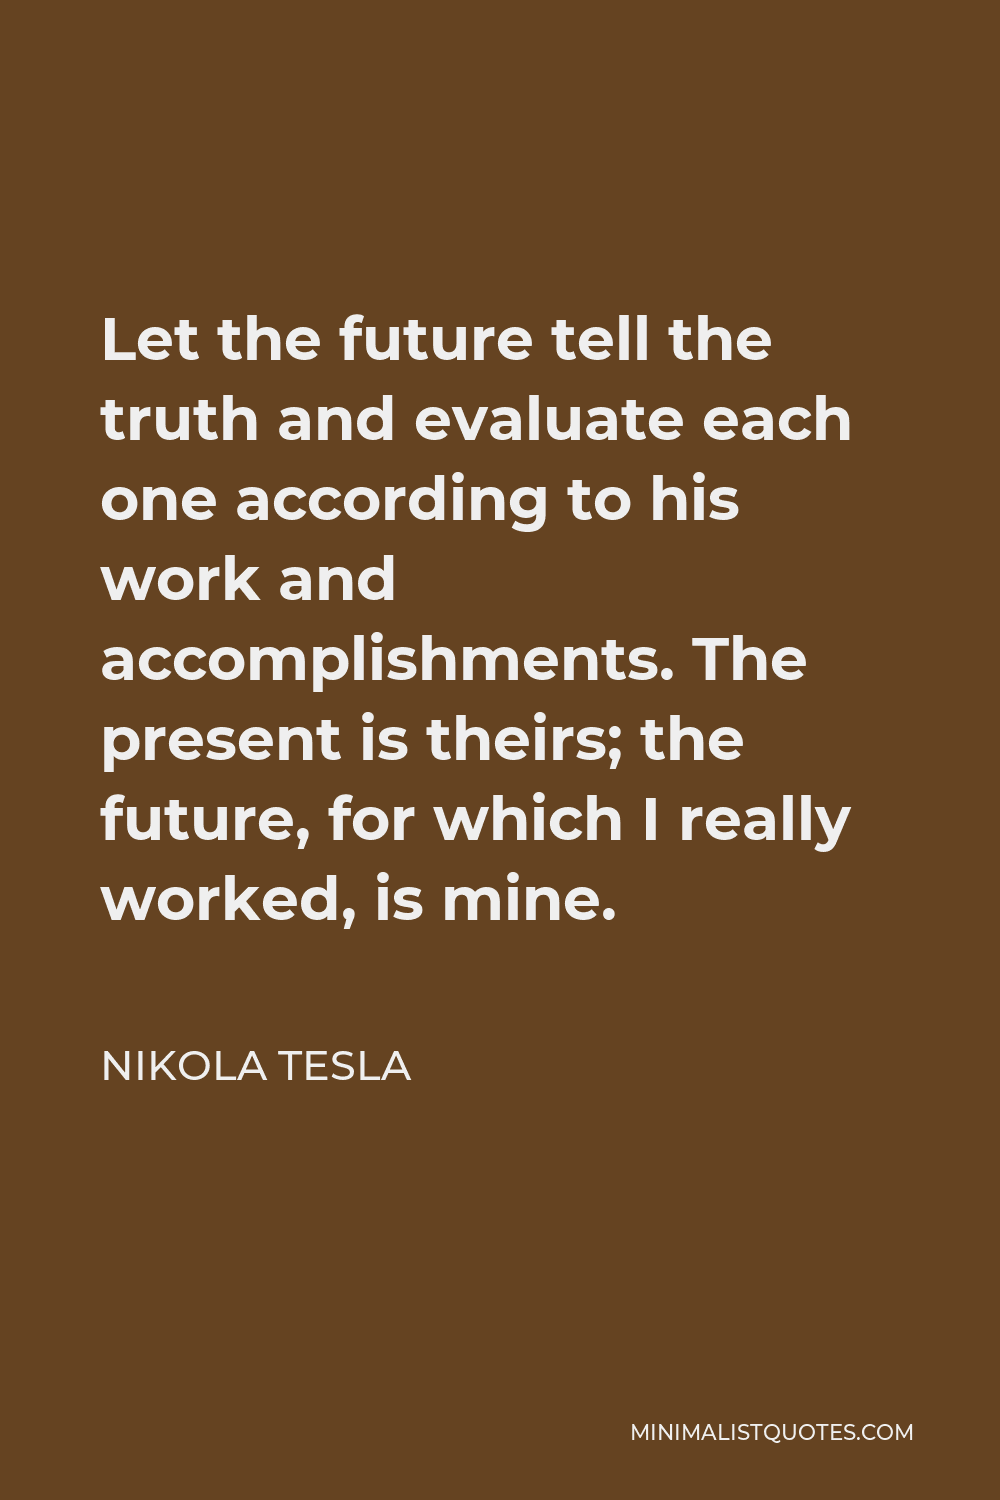 Nikola Tesla Quote - Let the future tell the truth, and evaluate each one according to his work and accomplishments. The present is theirs; the future, for which I have really worked, is mine